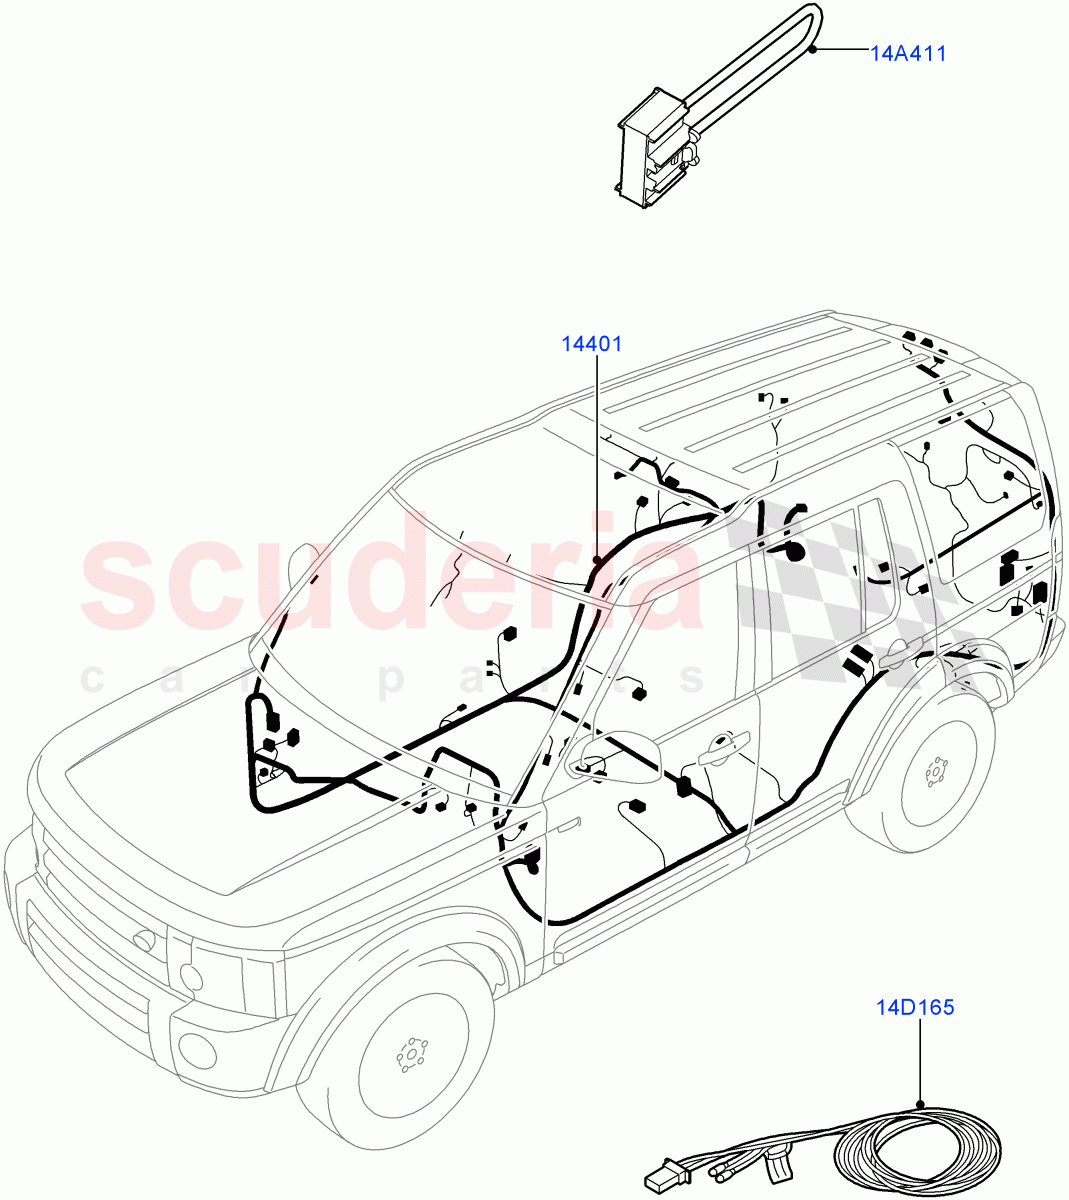 Electrical Wiring - Engine And Dash(Main Harness)((V)FROMBA000001,(V)TOBA999999) of Land Rover Land Rover Discovery 4 (2010-2016) [3.0 Diesel 24V DOHC TC]